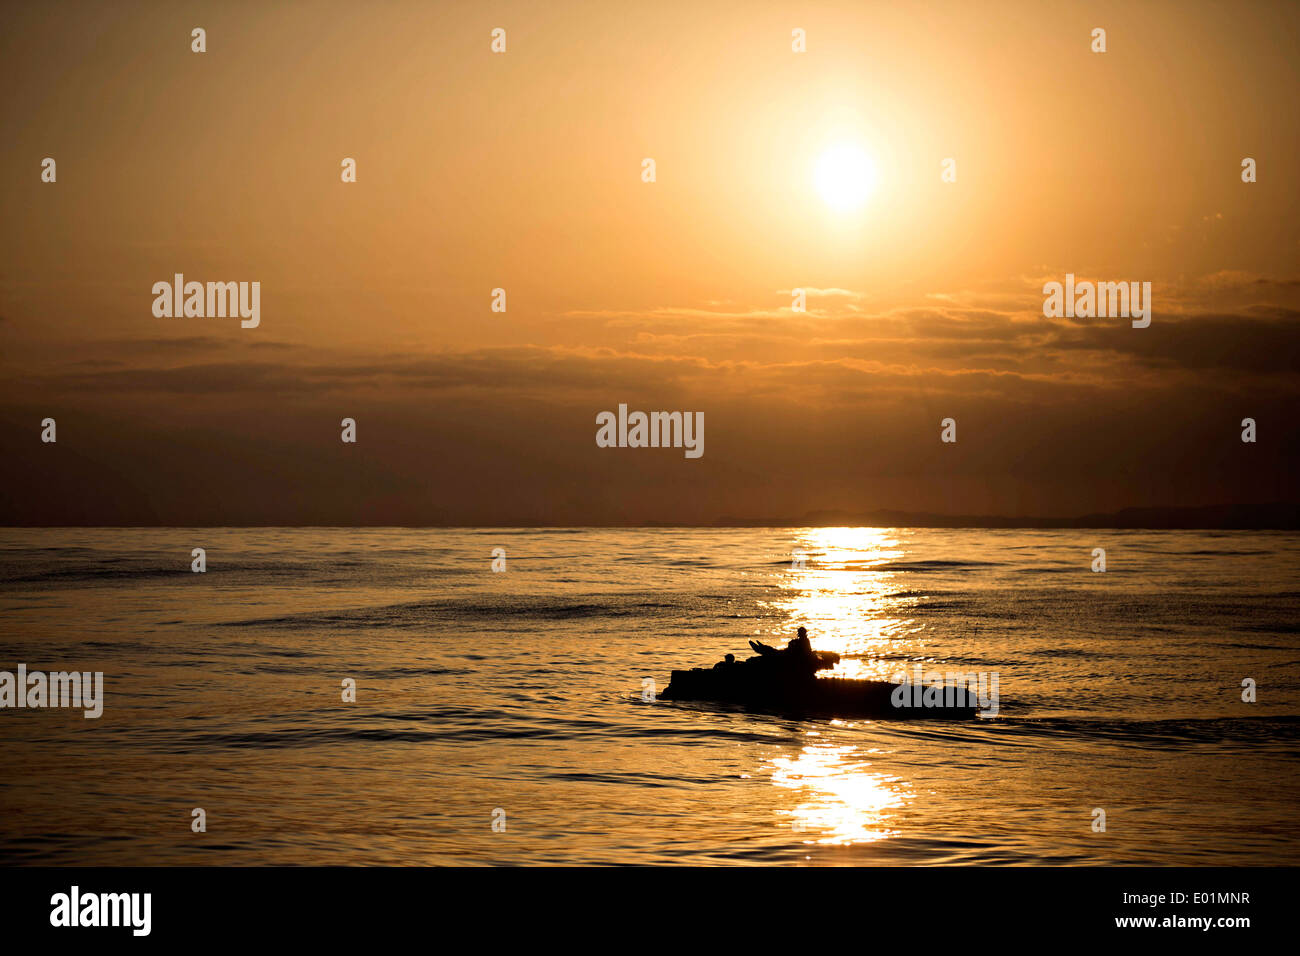 A US Marine Corps amphibious assault vehicle maneuvers through the water at sunset during a splash and recovery exercise February 28, 2014 in the East China Sea. Stock Photo